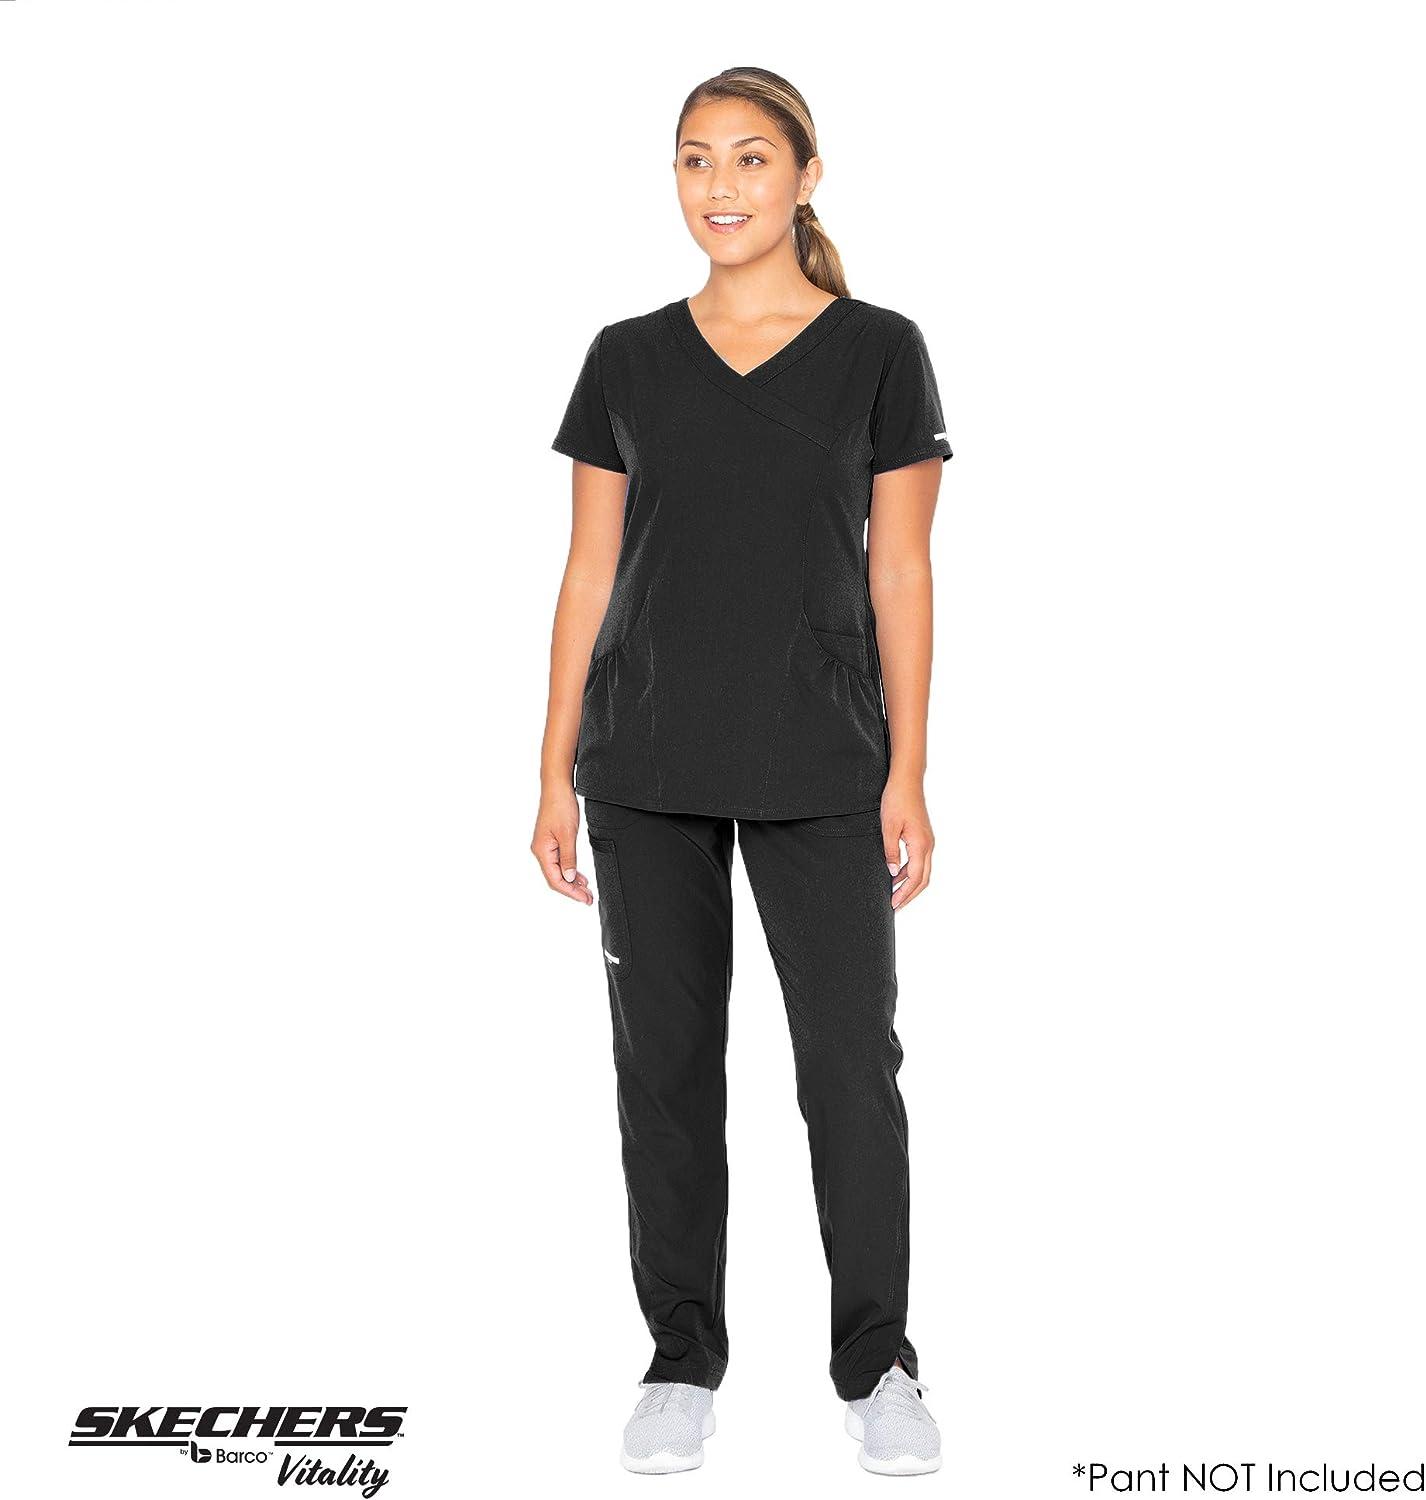 BARCO Skechers Vitality Charge Scrub Top for Women - V-Neck Medical Top,  4-Way Stretch Women's Scrub Top